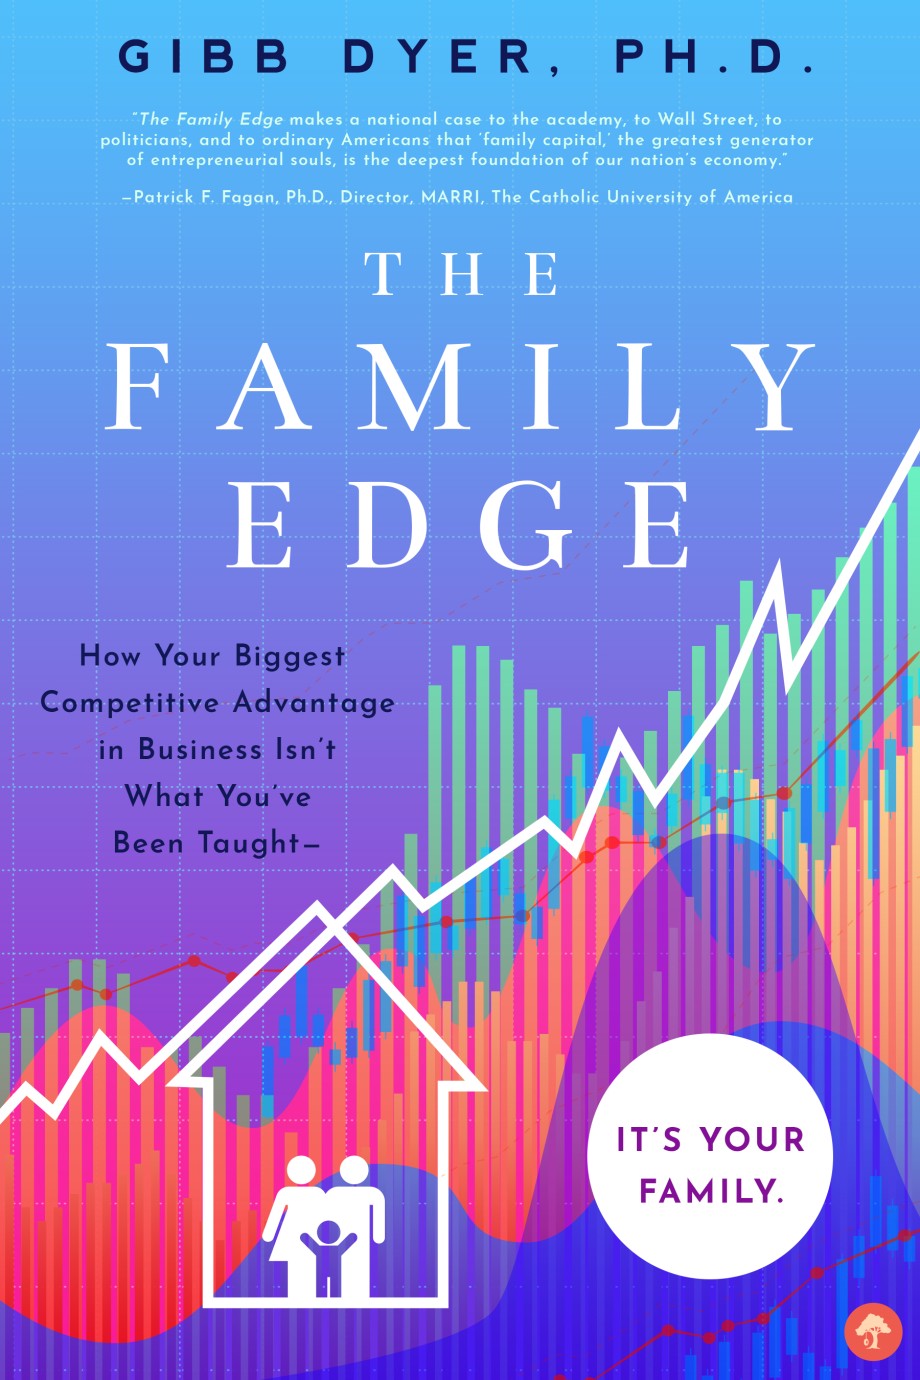 Family Edge How Your Biggest Competitive Advantage in Business Isn't What You've Been Taught . . . It's Your Family